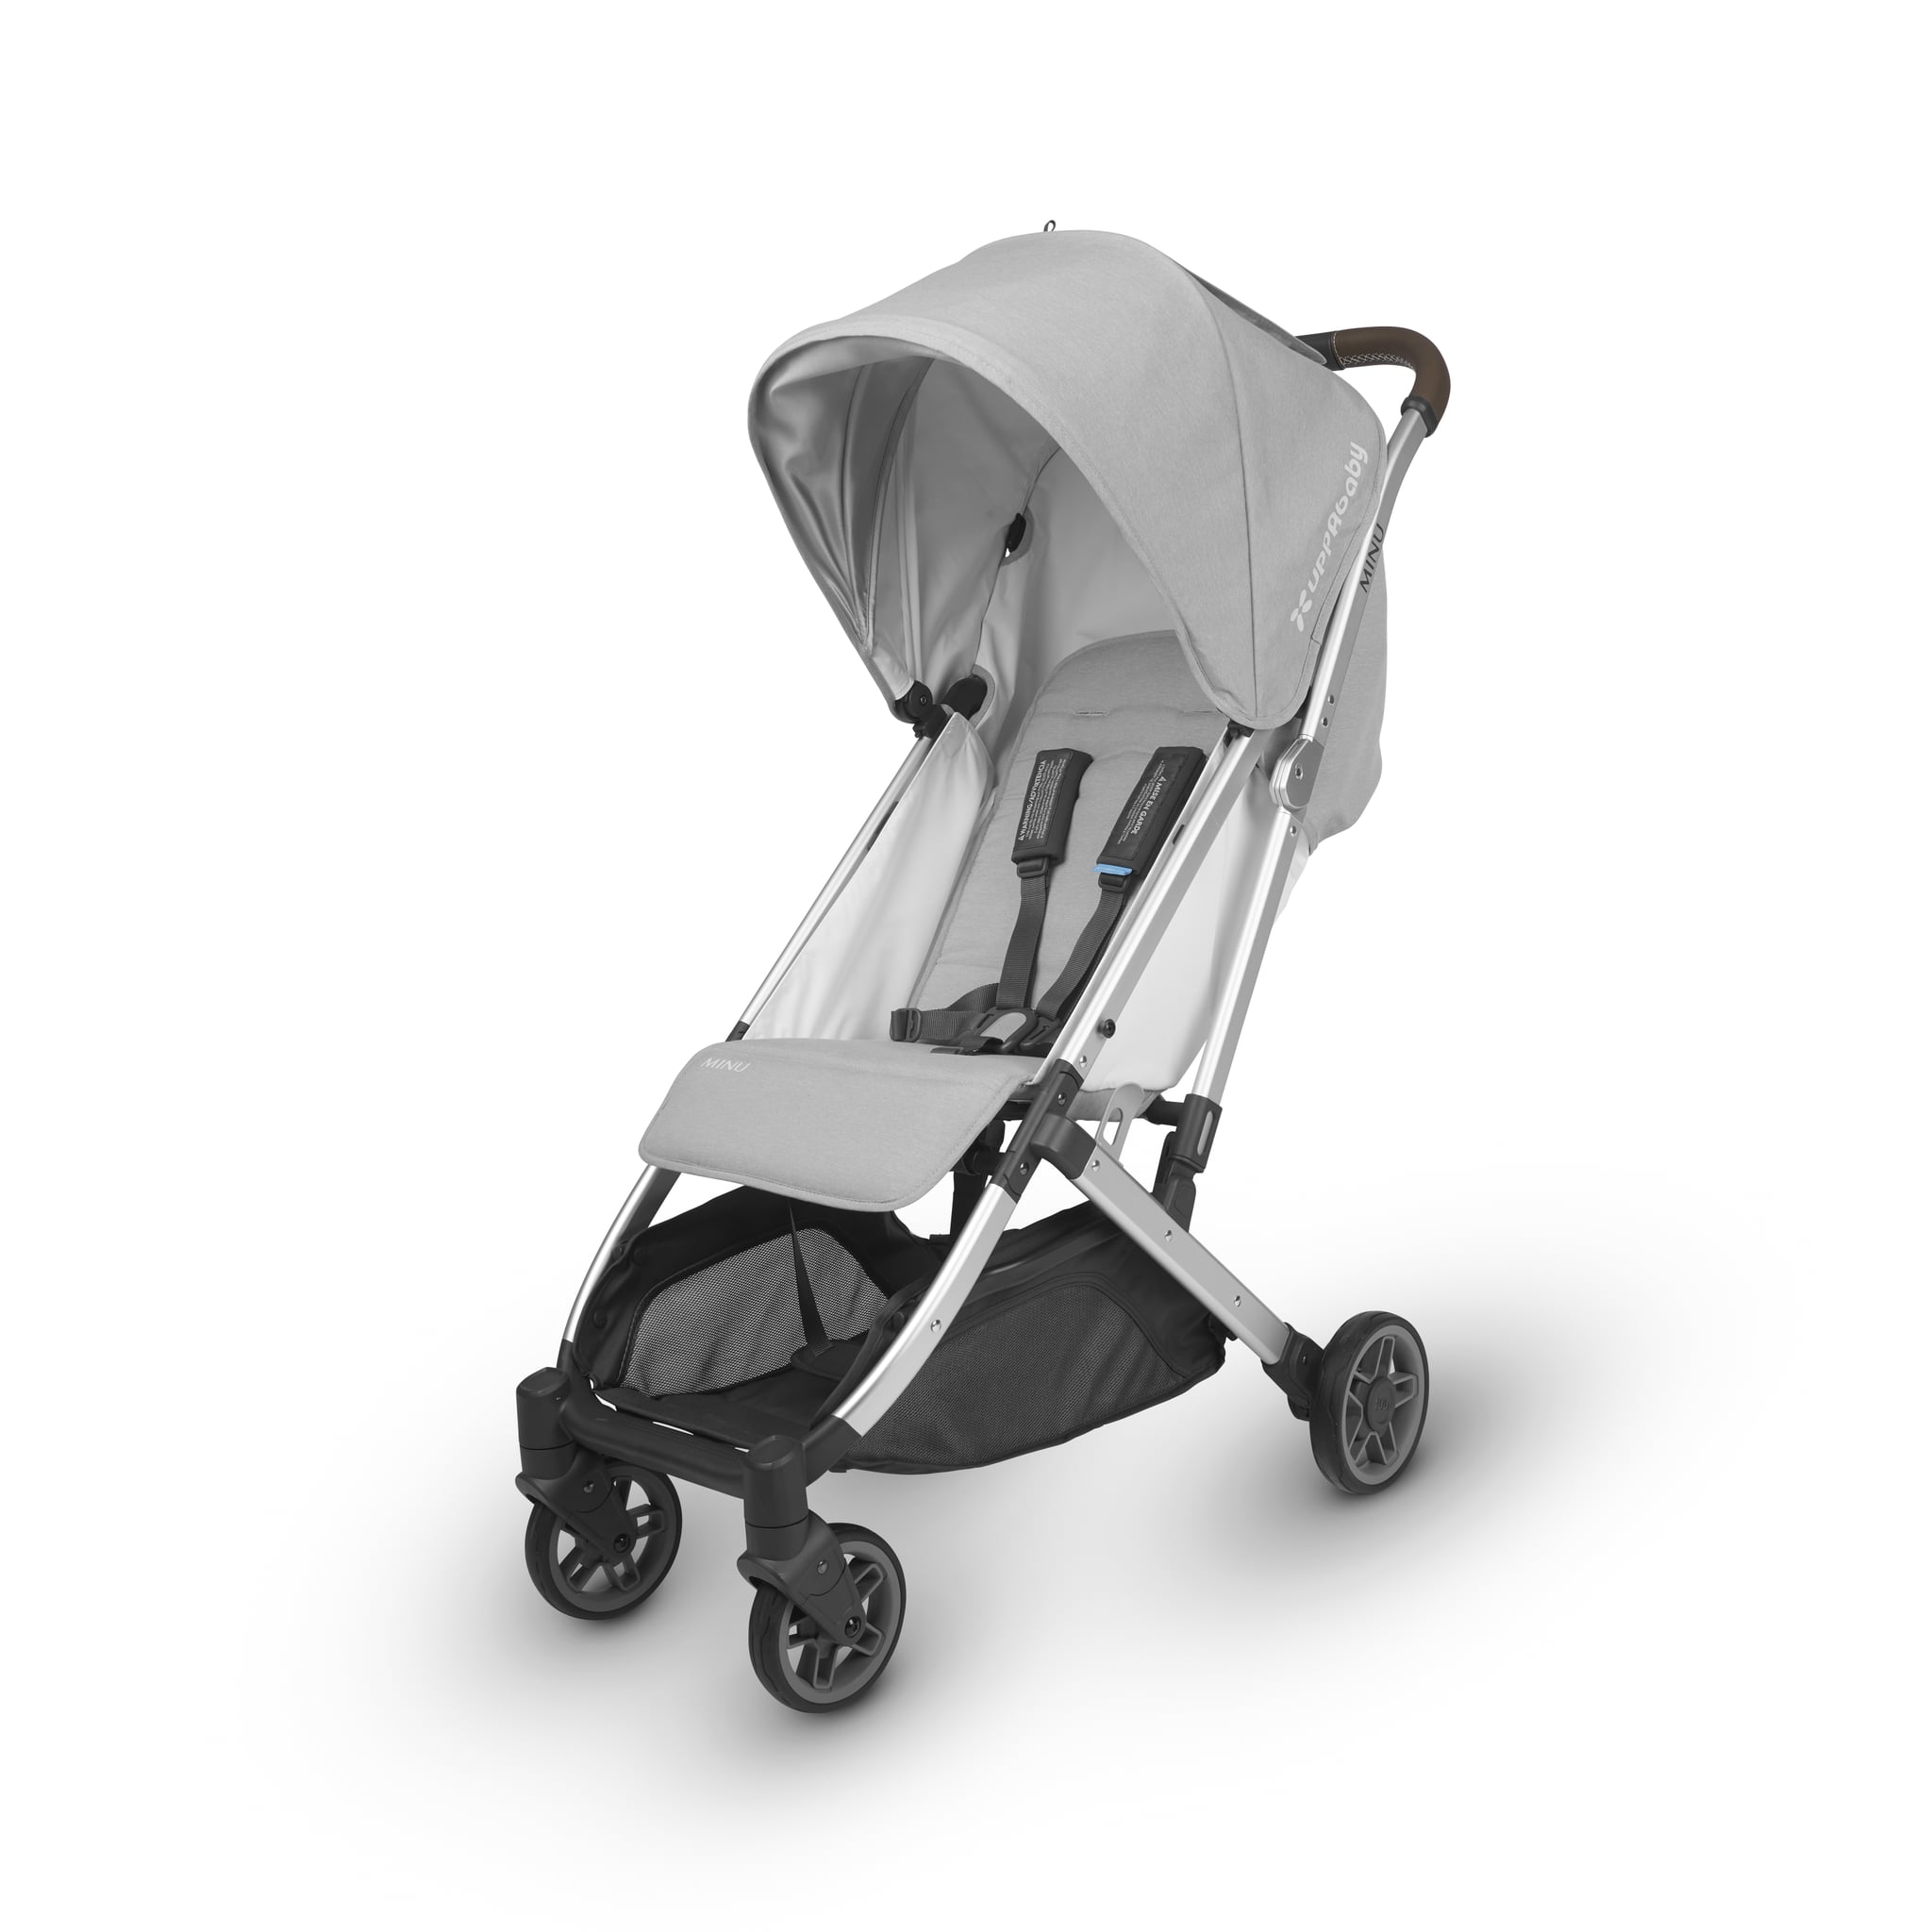 <p><a href="http://uppababy.com/strollers/lightweight/minu-v2/">BUY NOW</a></p><p>$449</p><p><strong>The <a href="http://uppababy.com/strollers/lightweight/minu-v2/" class="ga-track">UPPAbaby MINU V2</a> ($449) </strong></p> <p>This stroller is perfect for anyone looking for a lightweight, compact stroller that's easily collapsable with one hand but doesn't skimp on bells and whistles. Its compatible with the brand's MESA car seat when you add adapters, has a multiposition recline to make napping easier, an extendable UPF 50+ sunshade, and can comfortably hold a child of up to 50 pounds. Fans of UPPAbaby will appreciate the signature smooth strolling as well.</p>